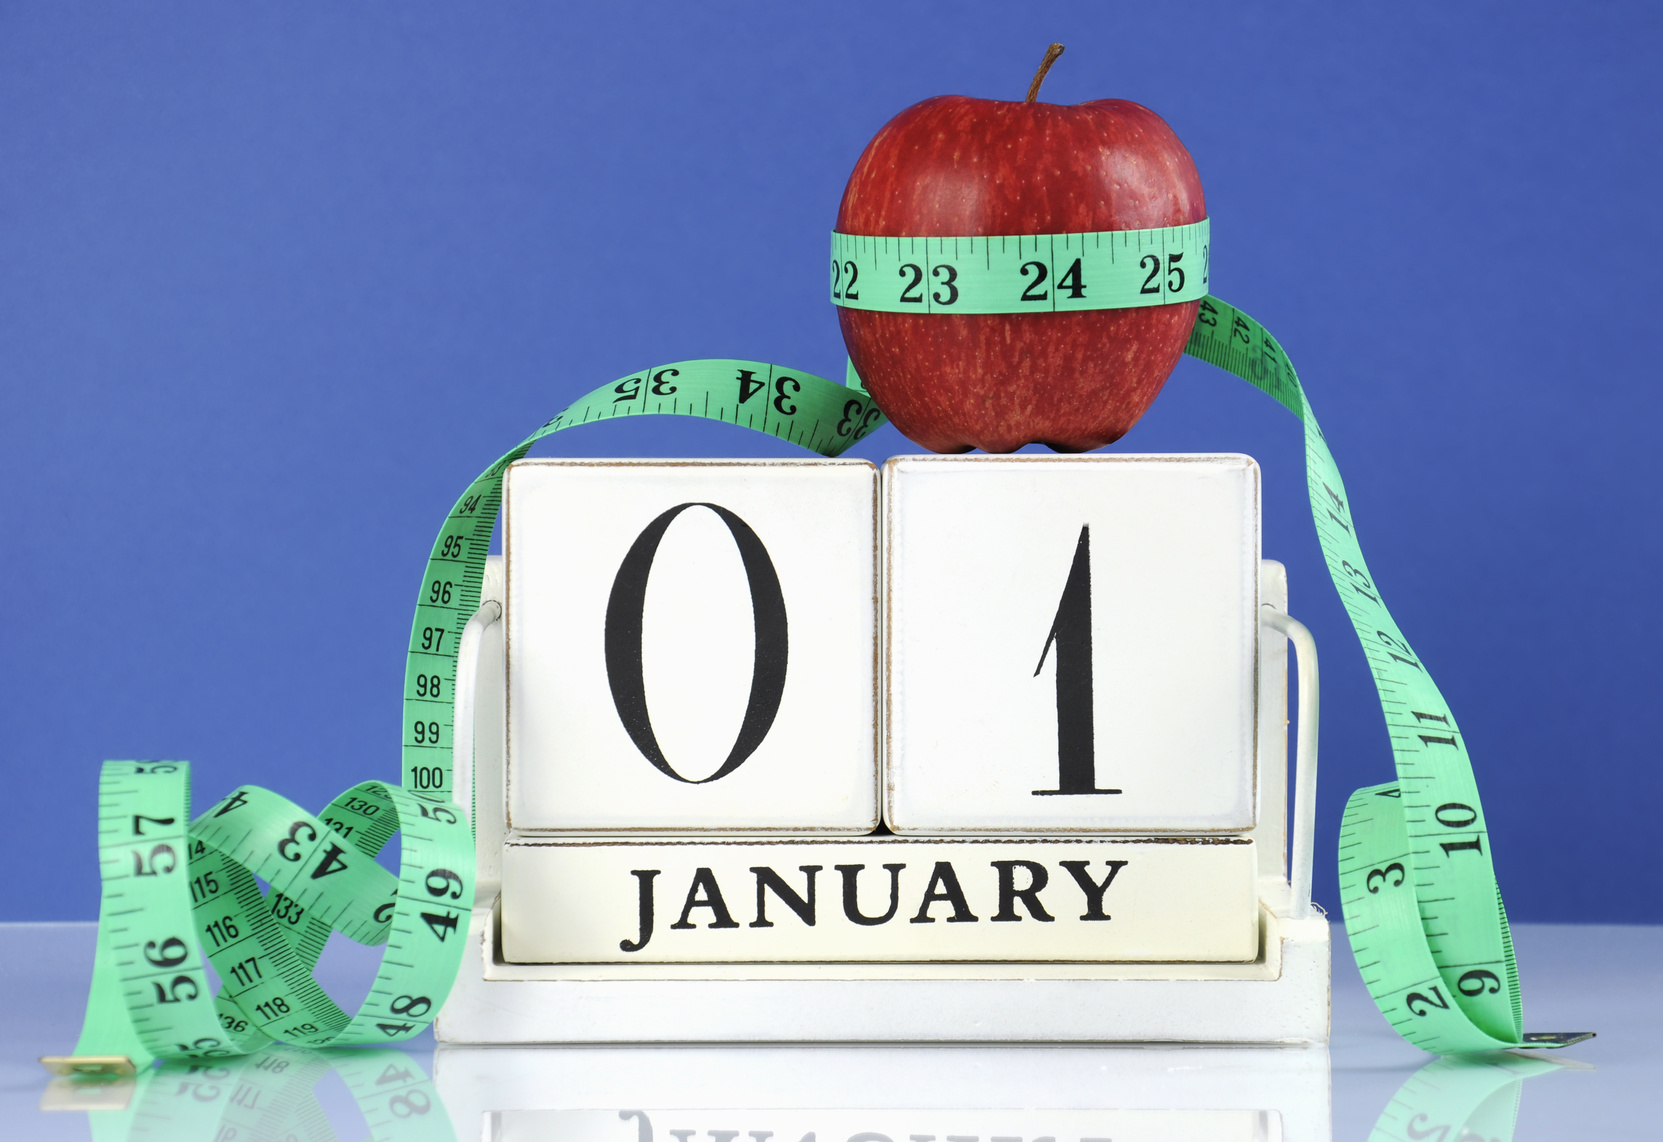 Easy but Healthy New Year's Resolutions to Make for 2016